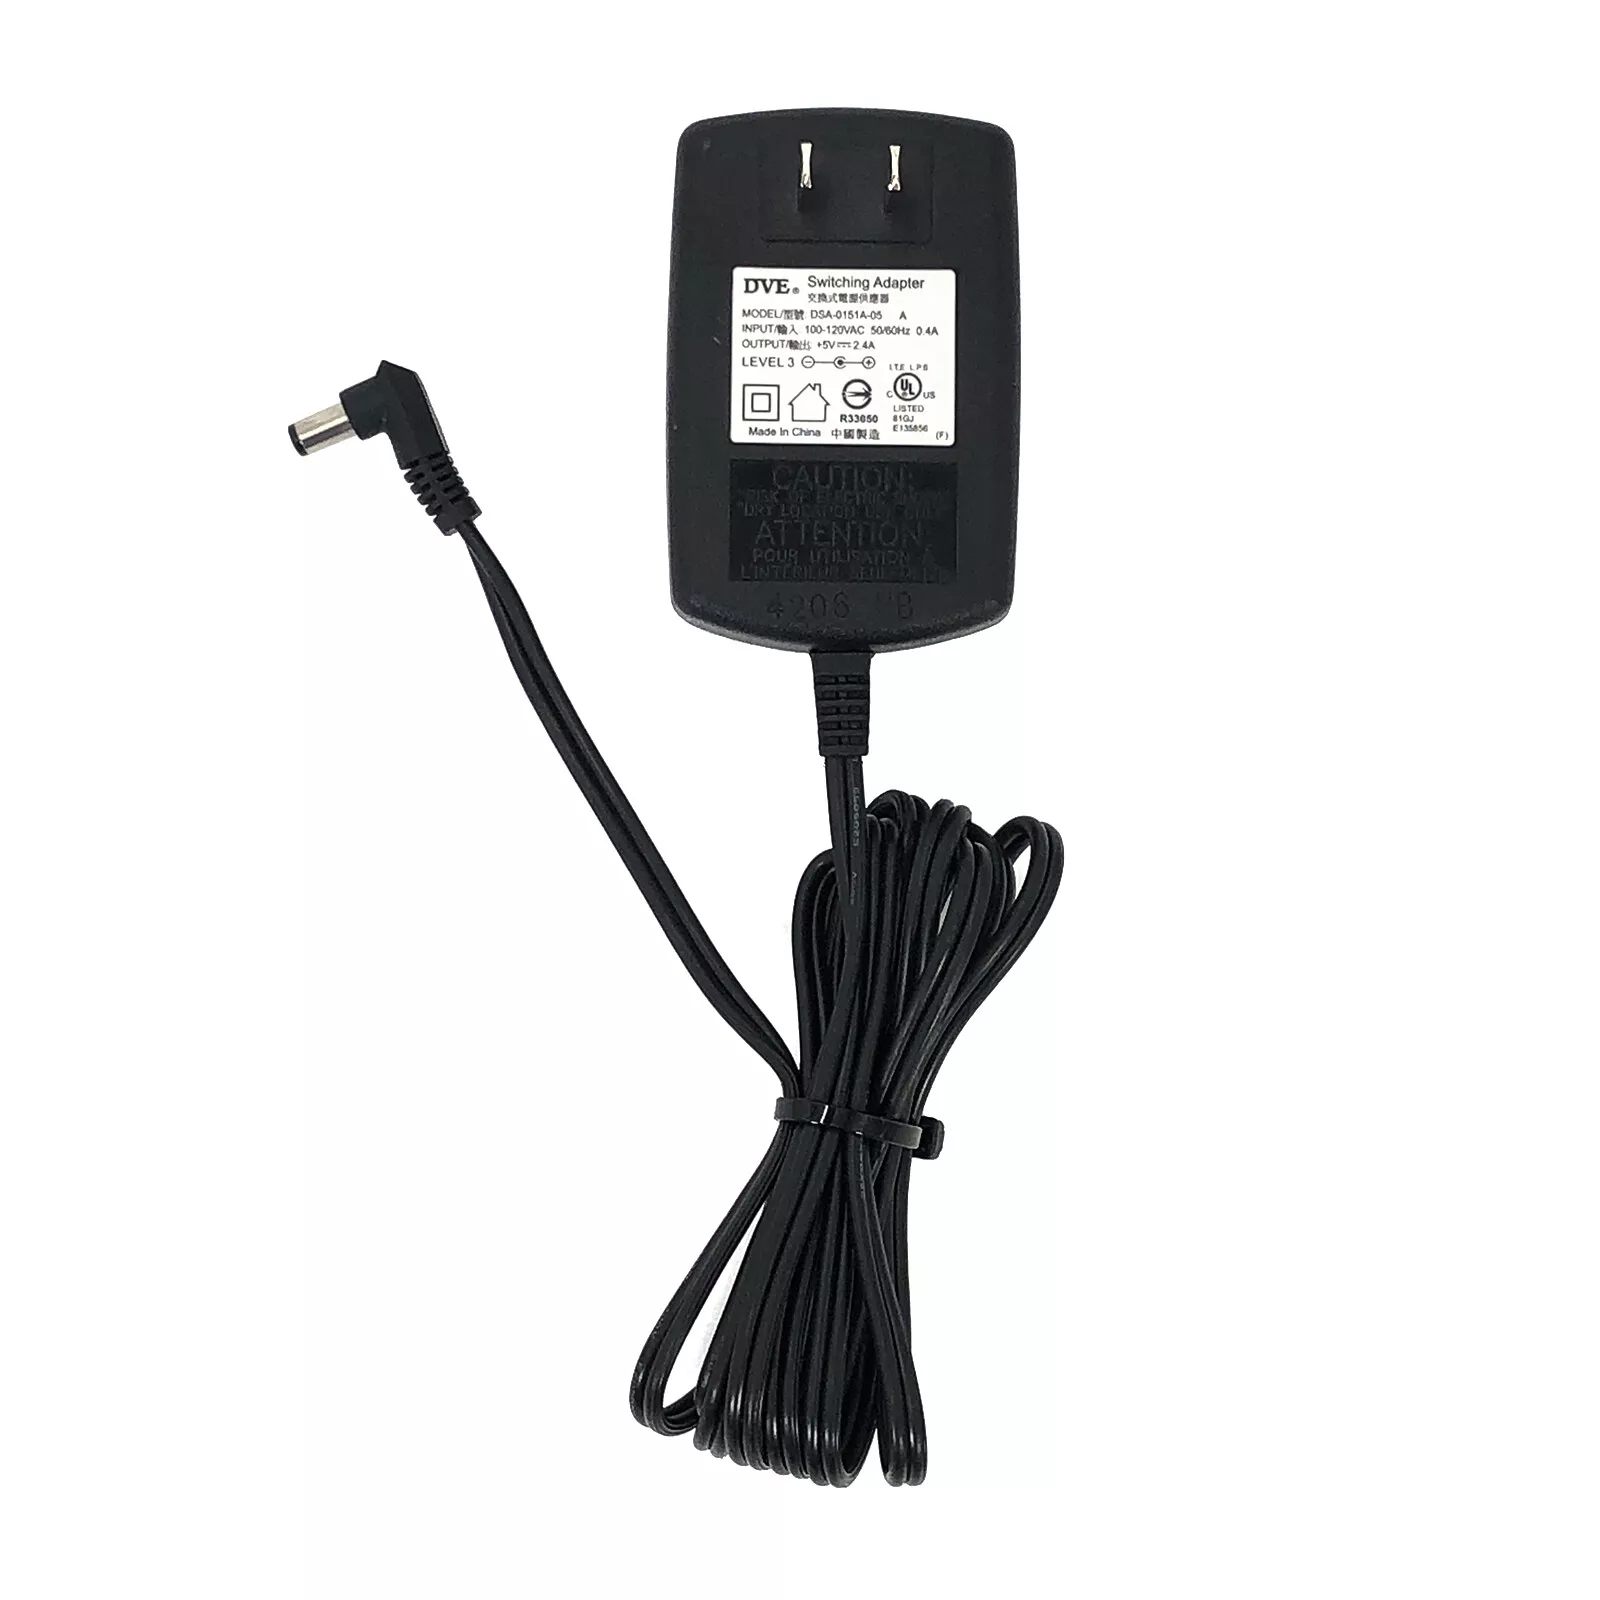 *Brand NEW*Genuine DVE +5V 2.4A 12W AC DC Wall Switching Adapter Model DSA-0151A-05 A Power Supply